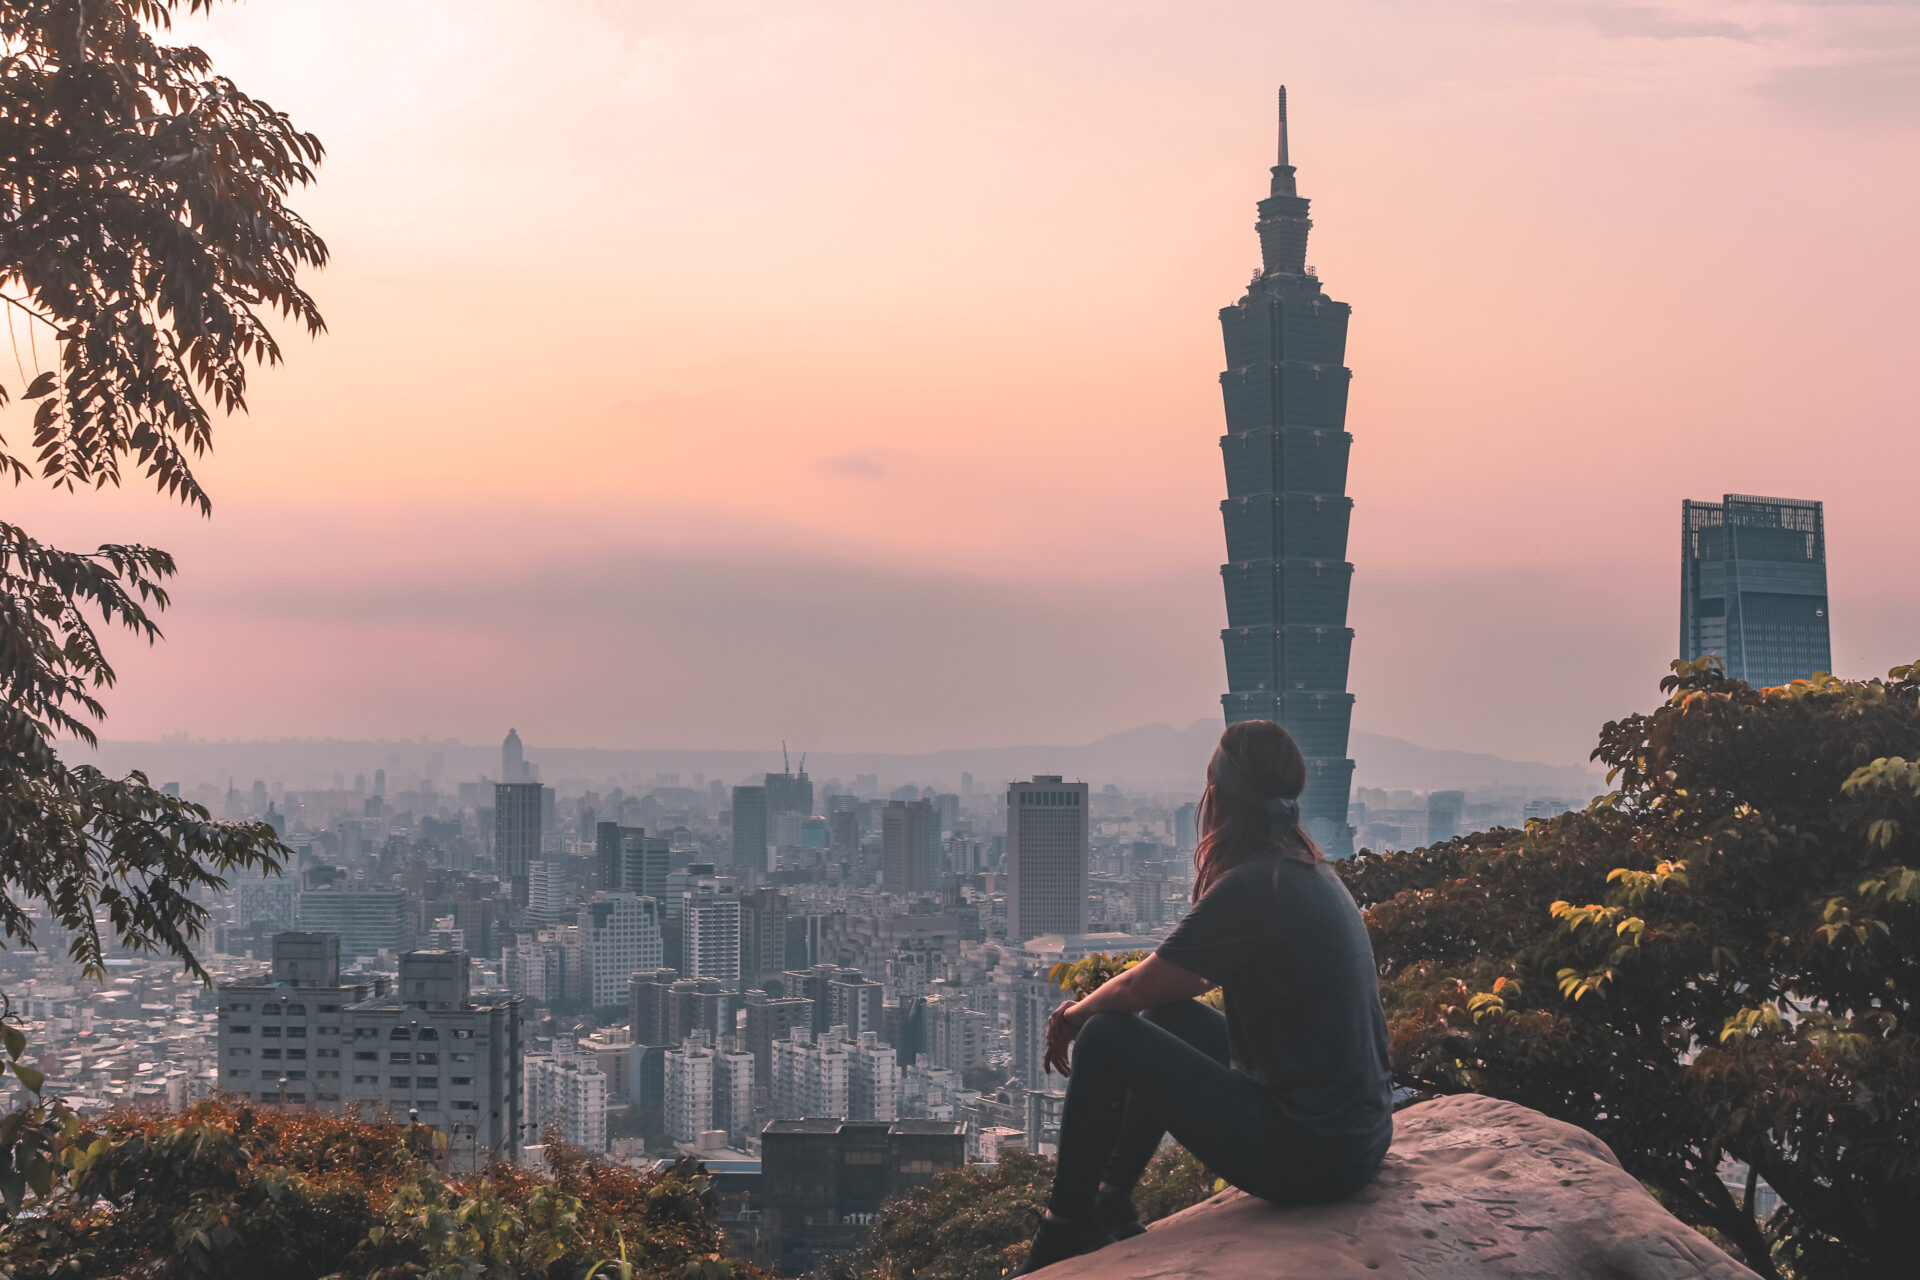 Wini overlooking Taipei 101 at the top of Elephant Mountain at sunset